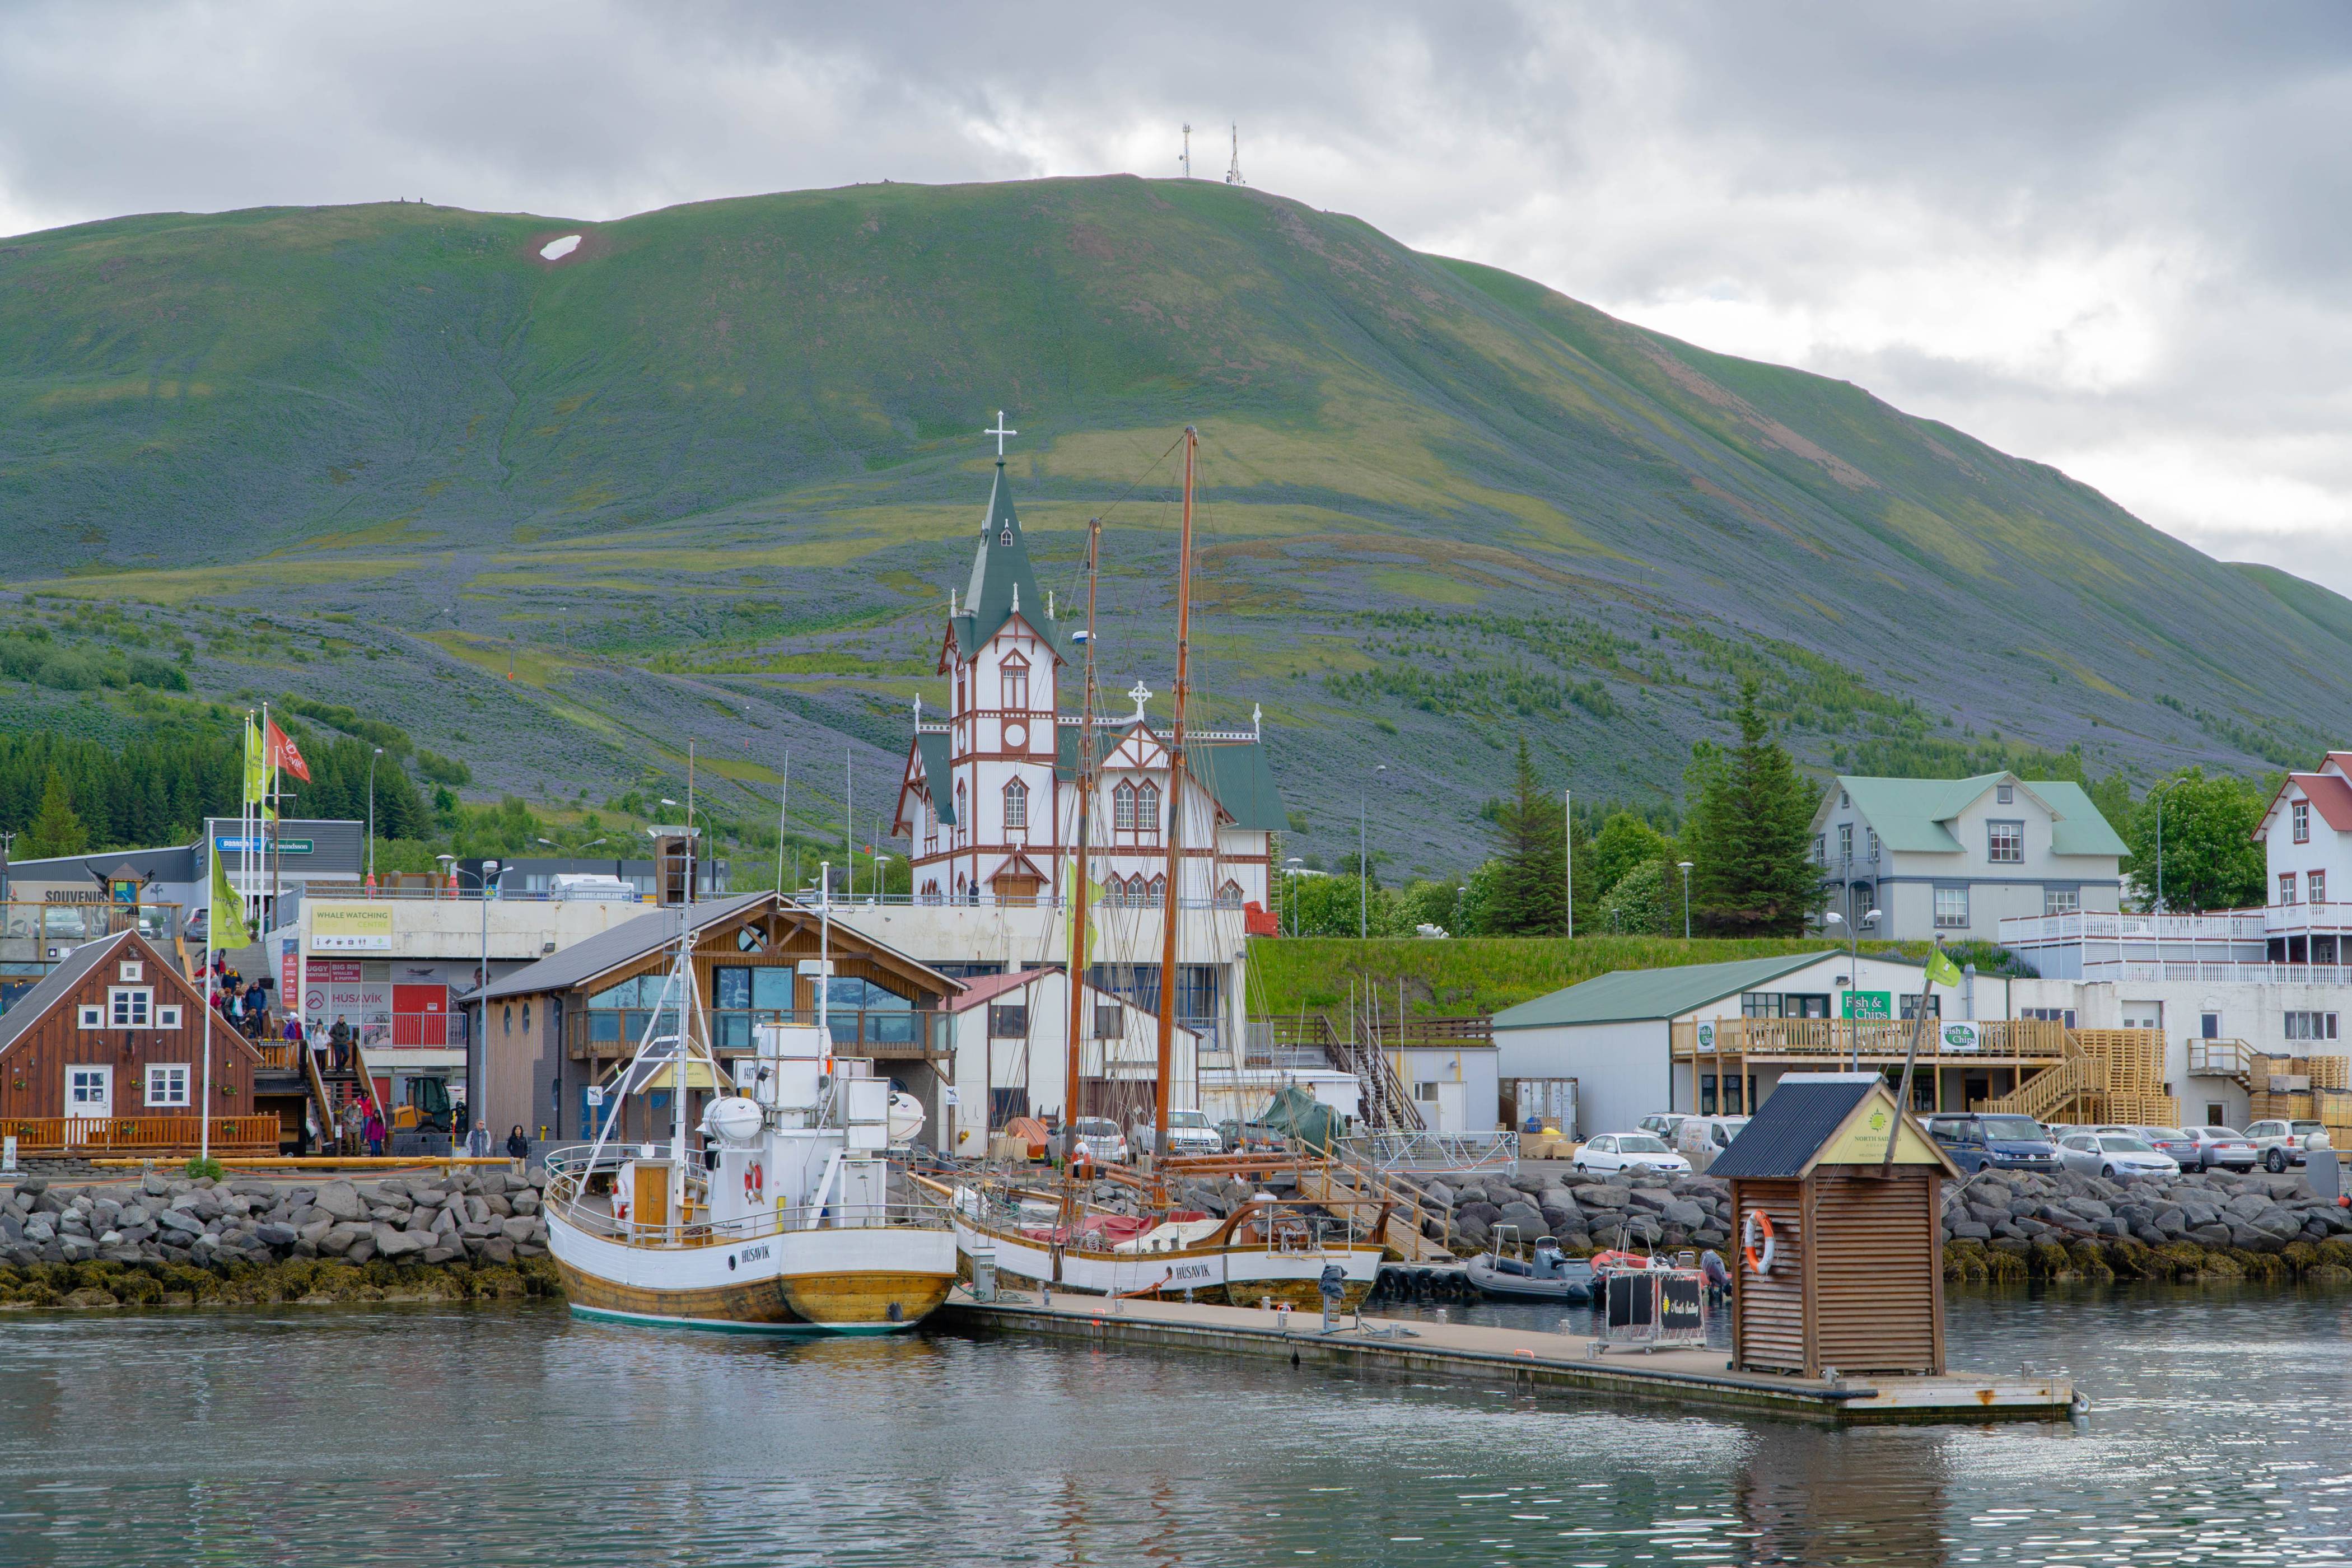 Husavik-harbor-with-two-small-boats-seen-from-the-ocean-with-husavik-church-in-the-background-on-a-summer-day